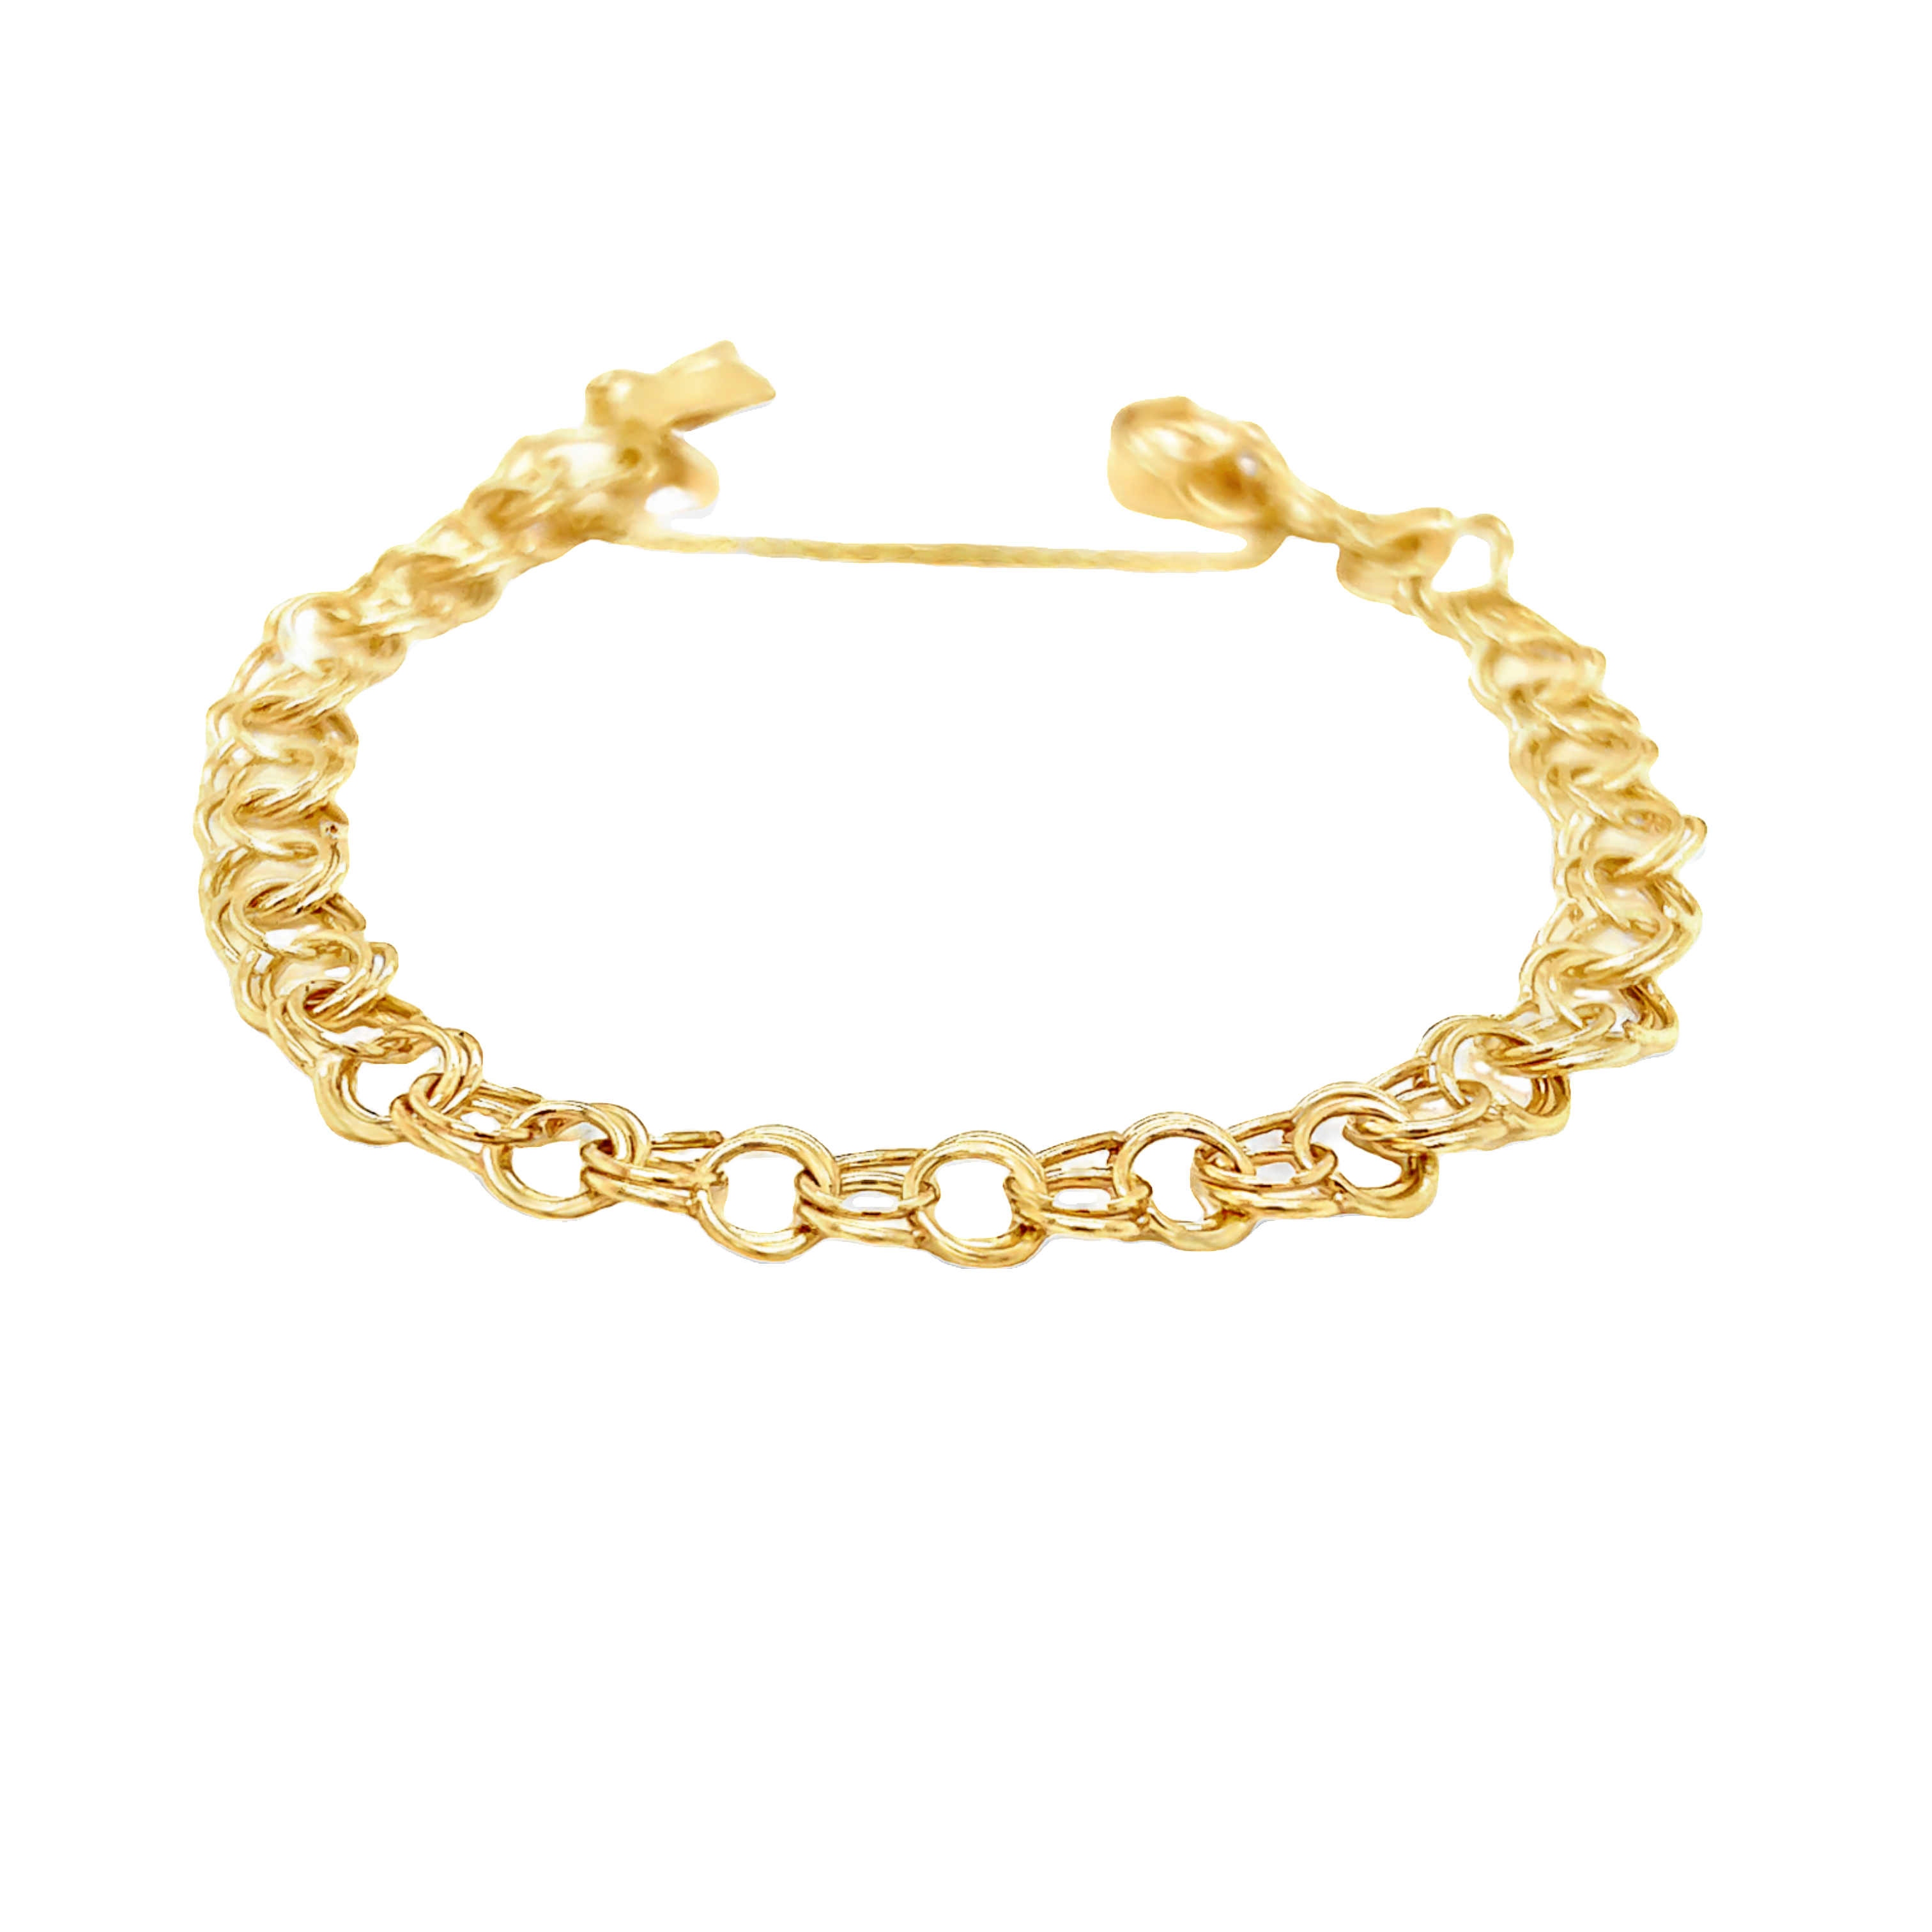 10k Yellow Gold Cable Link Bracelet